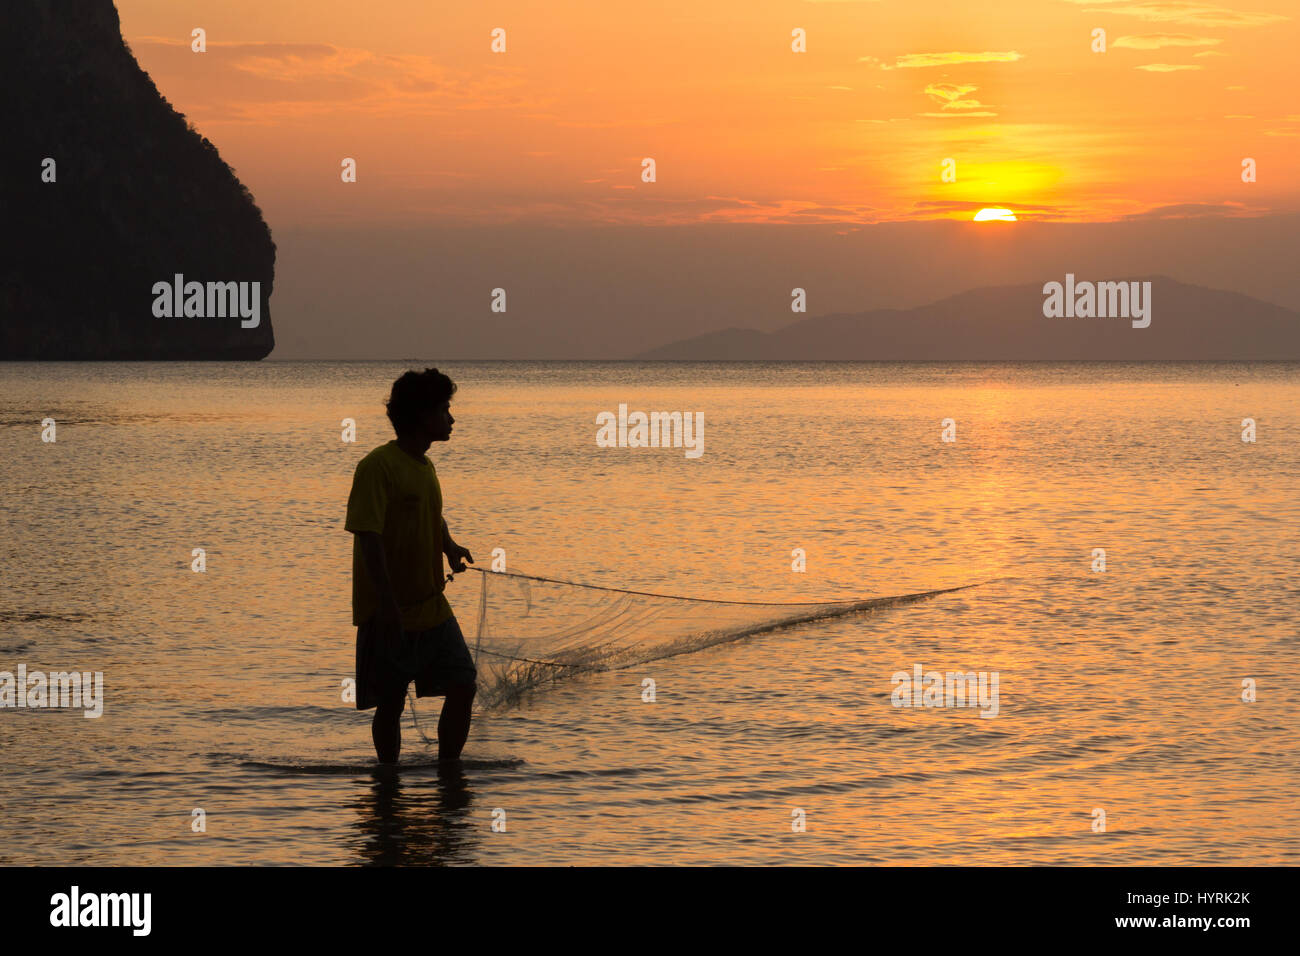 A fisherman pulls in his net at sunset on Rajamangala beach in Trang province, Thailand Stock Photo